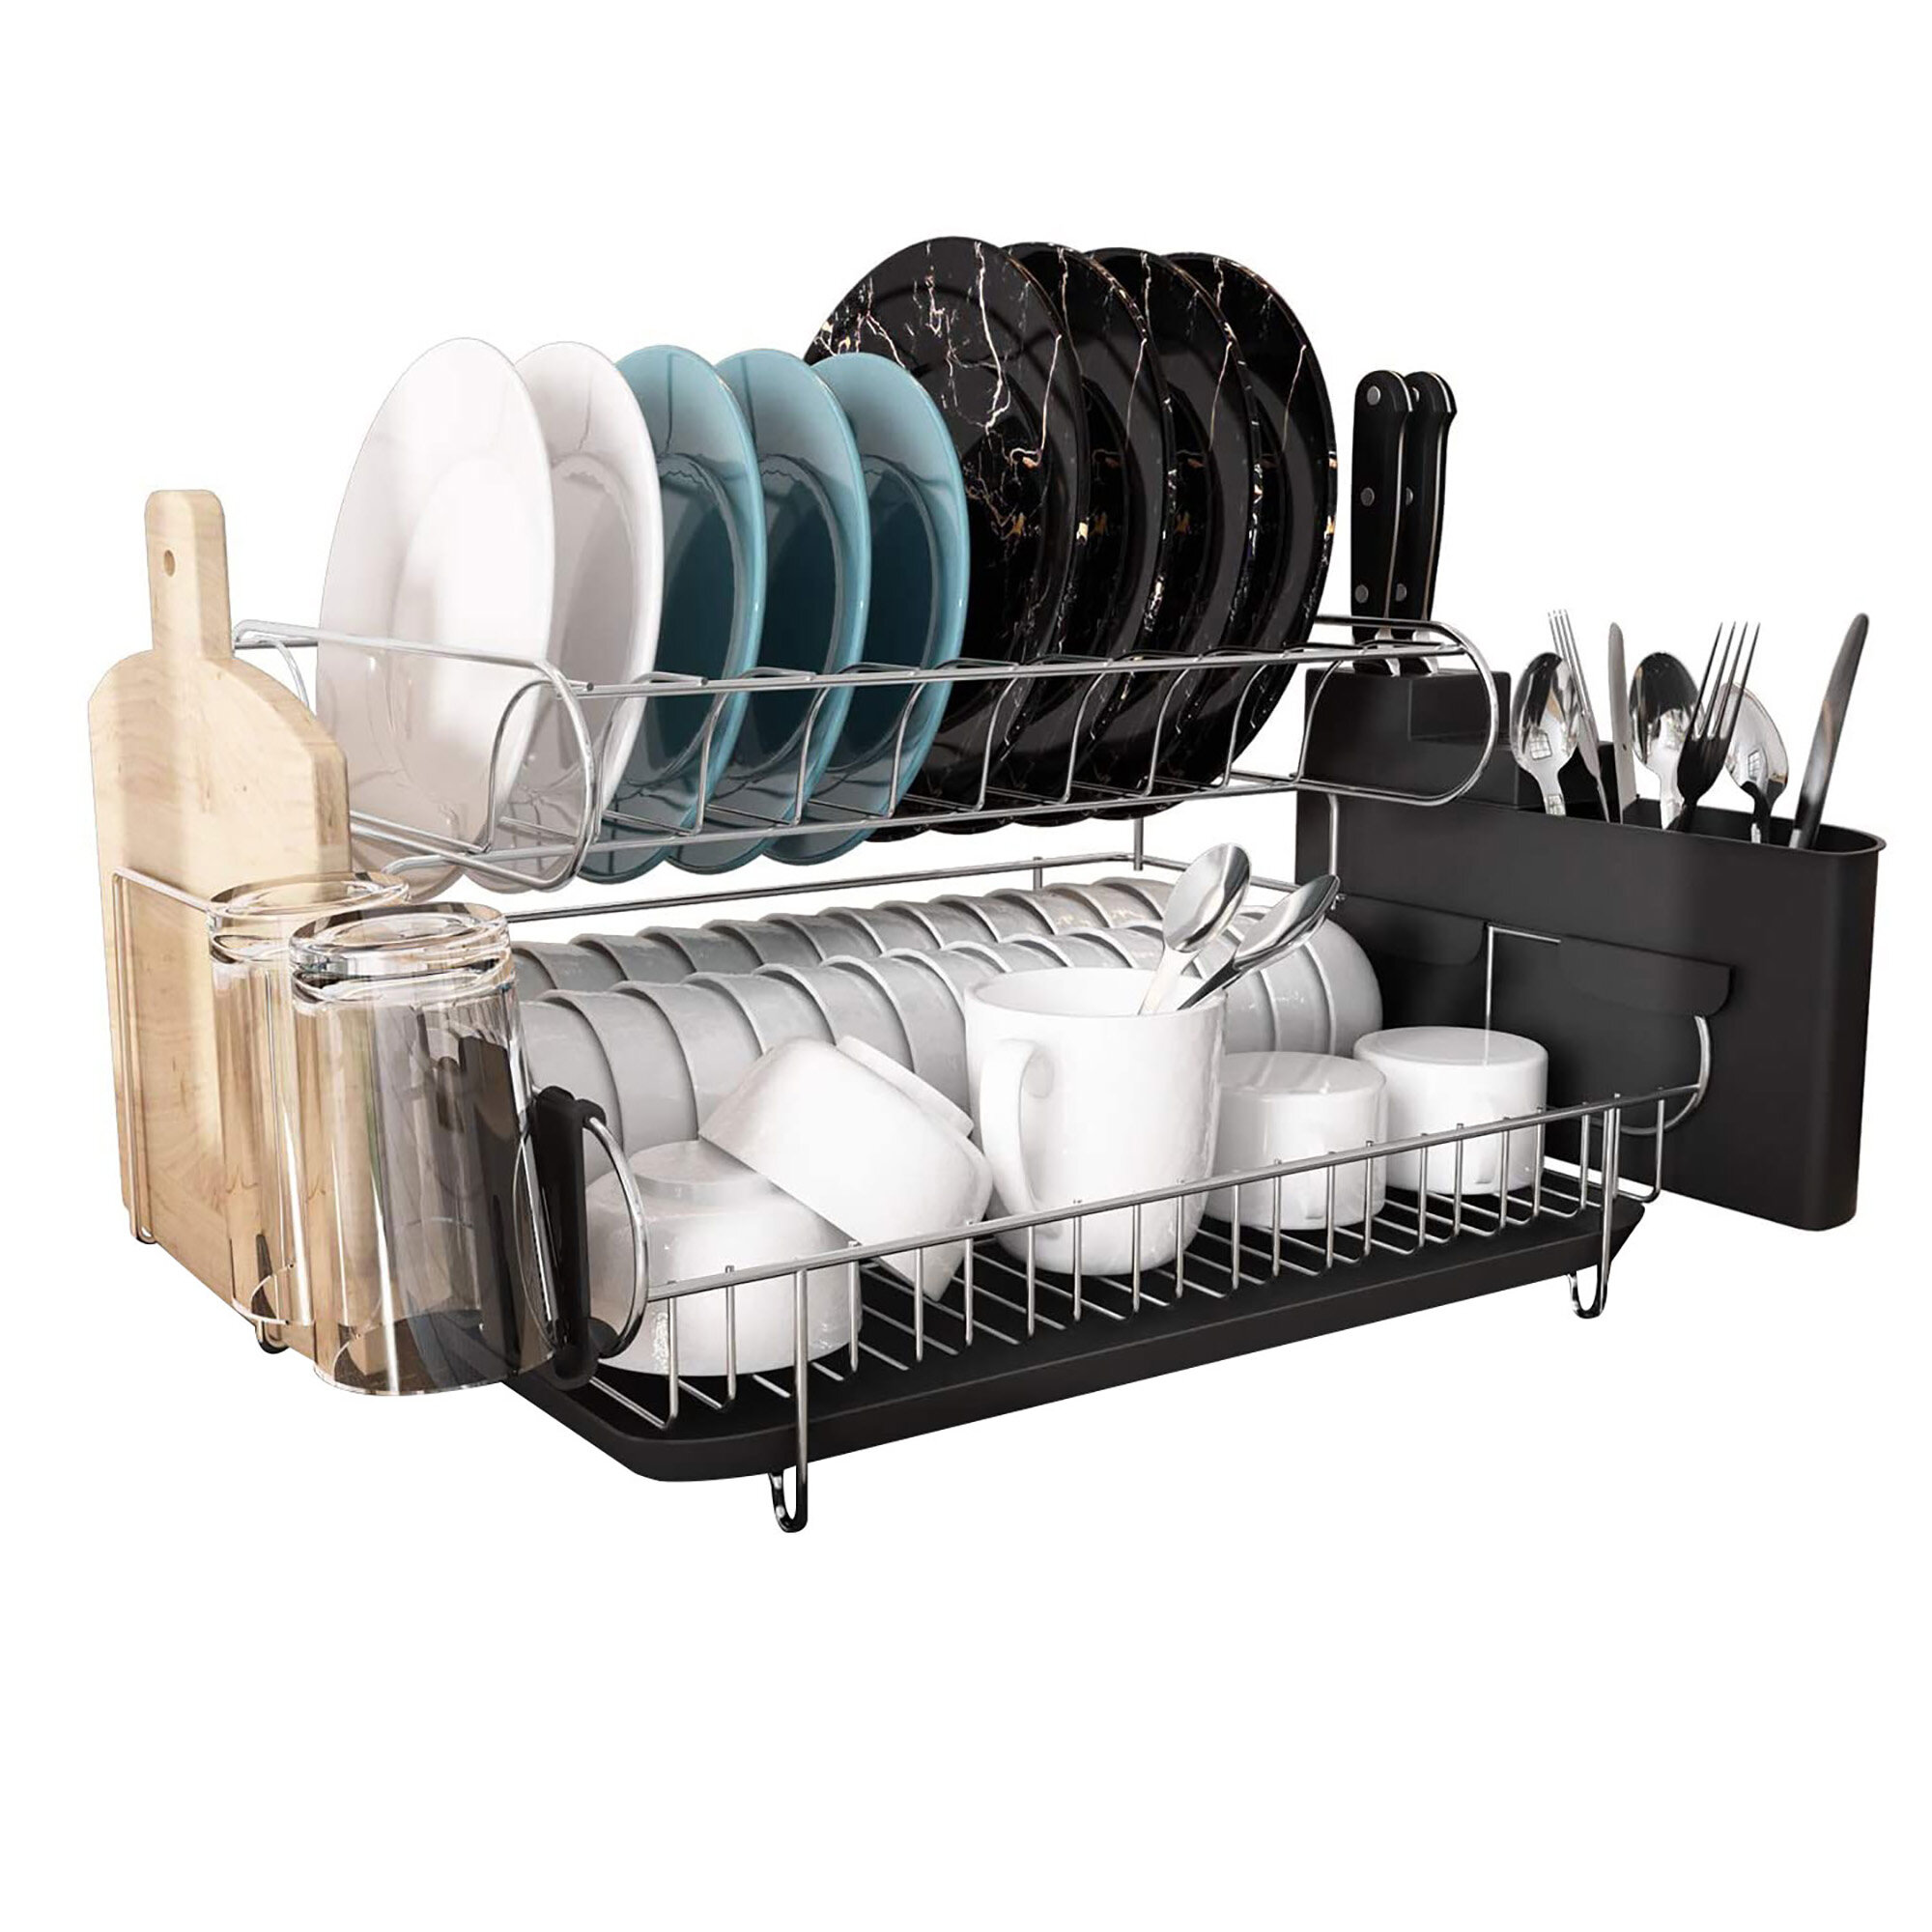 Prep & Savour Clayson Double Tier Stainless Steel Dish Rack, With Drainboard  Set And Utensil Holder & Reviews